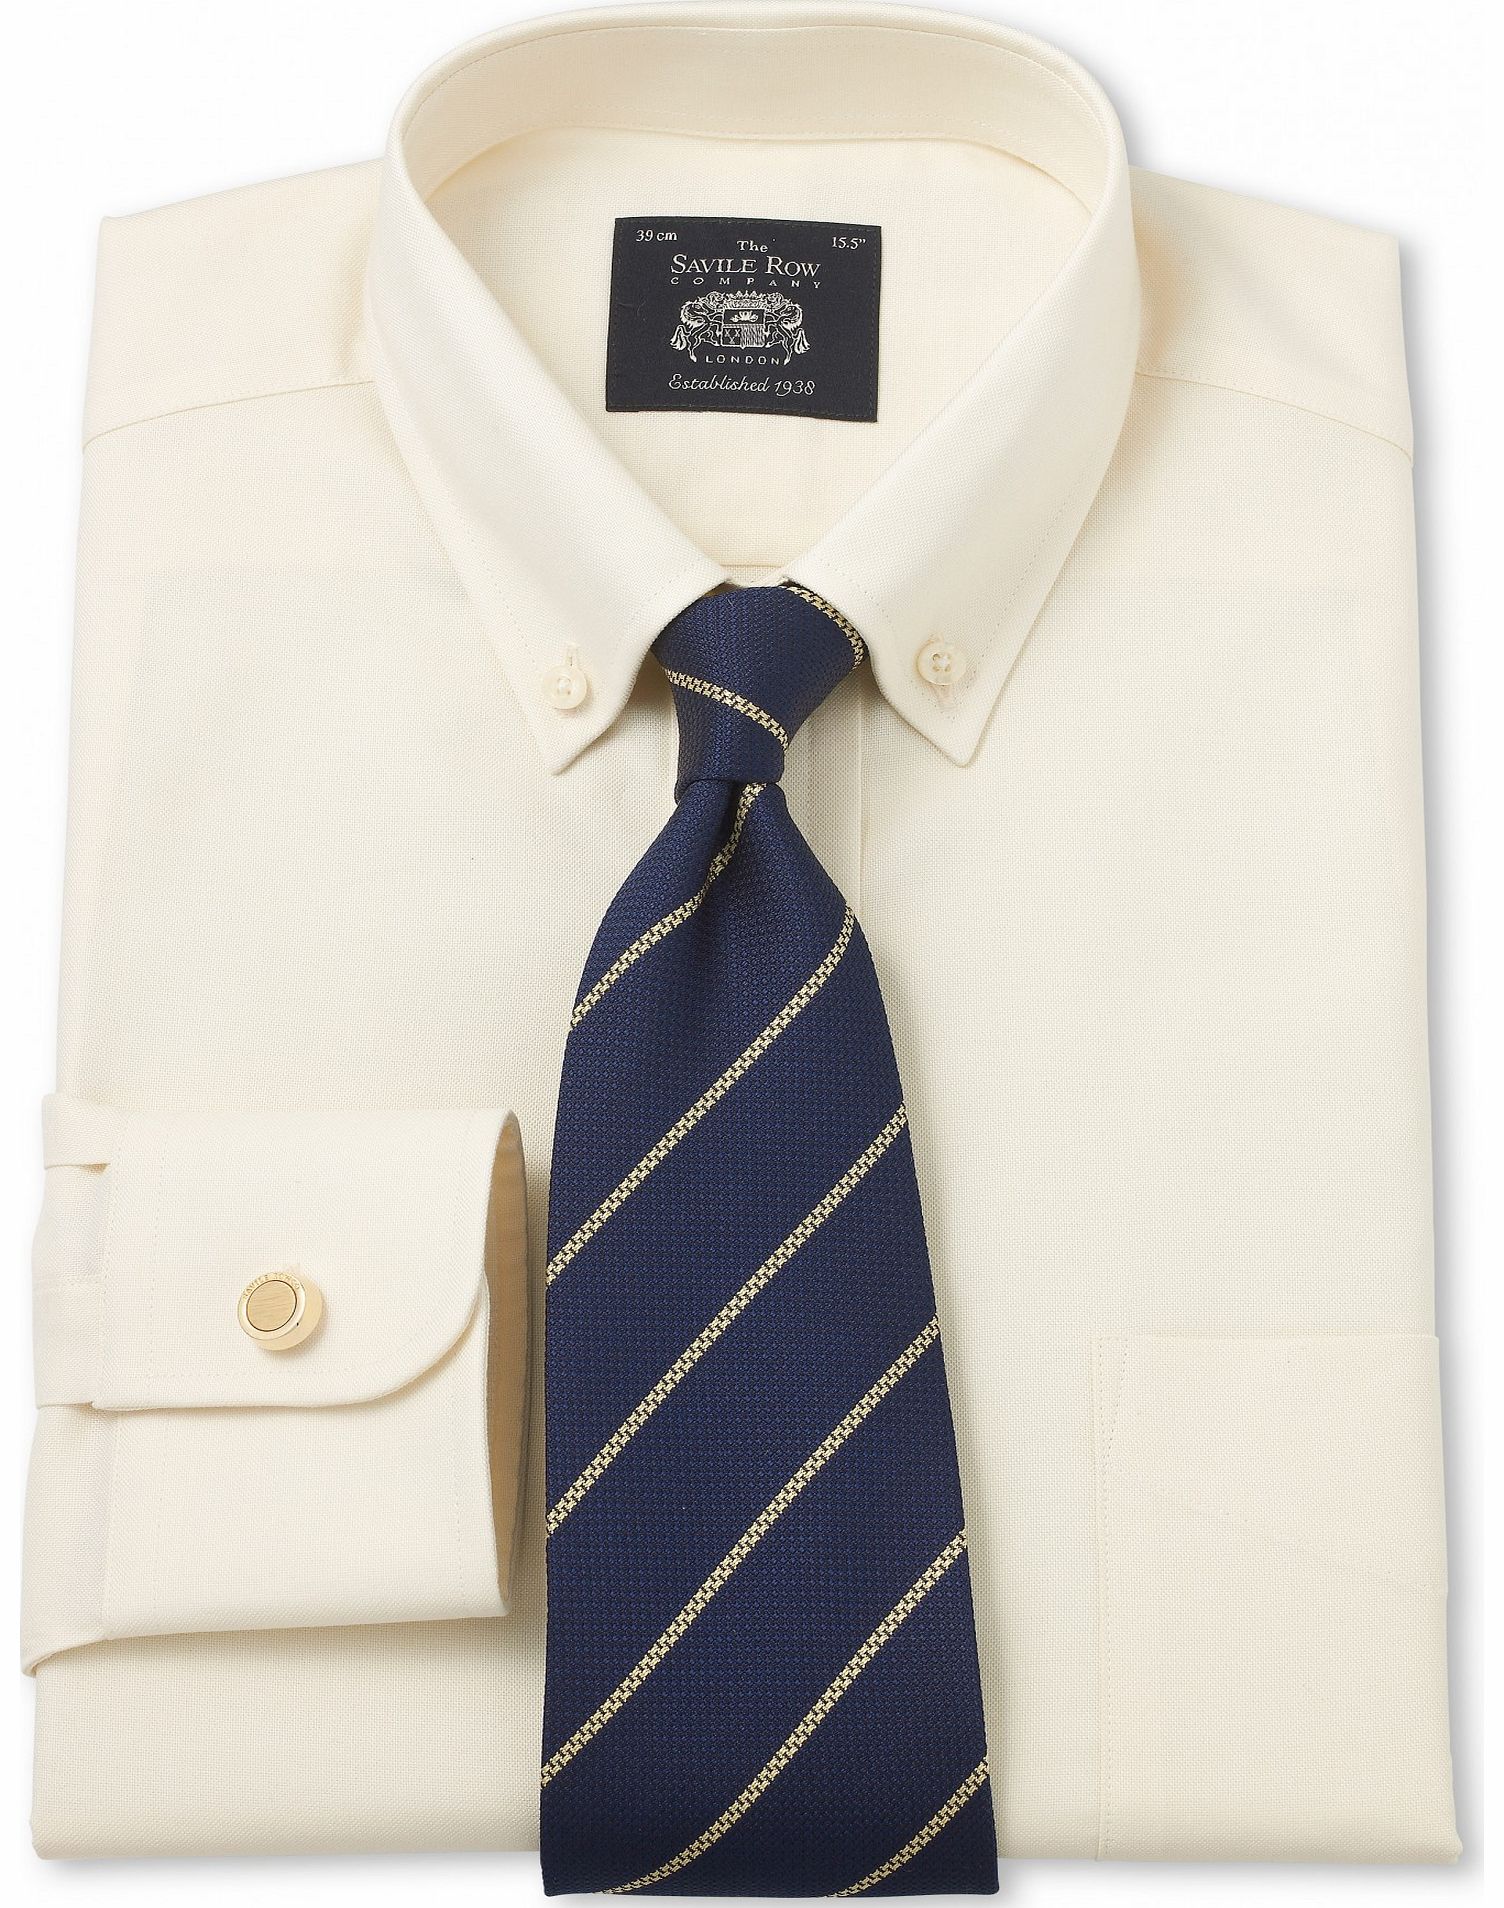 Savile Row Company Cream Pinpoint Classic Fit Shirt 15`` Lengthened